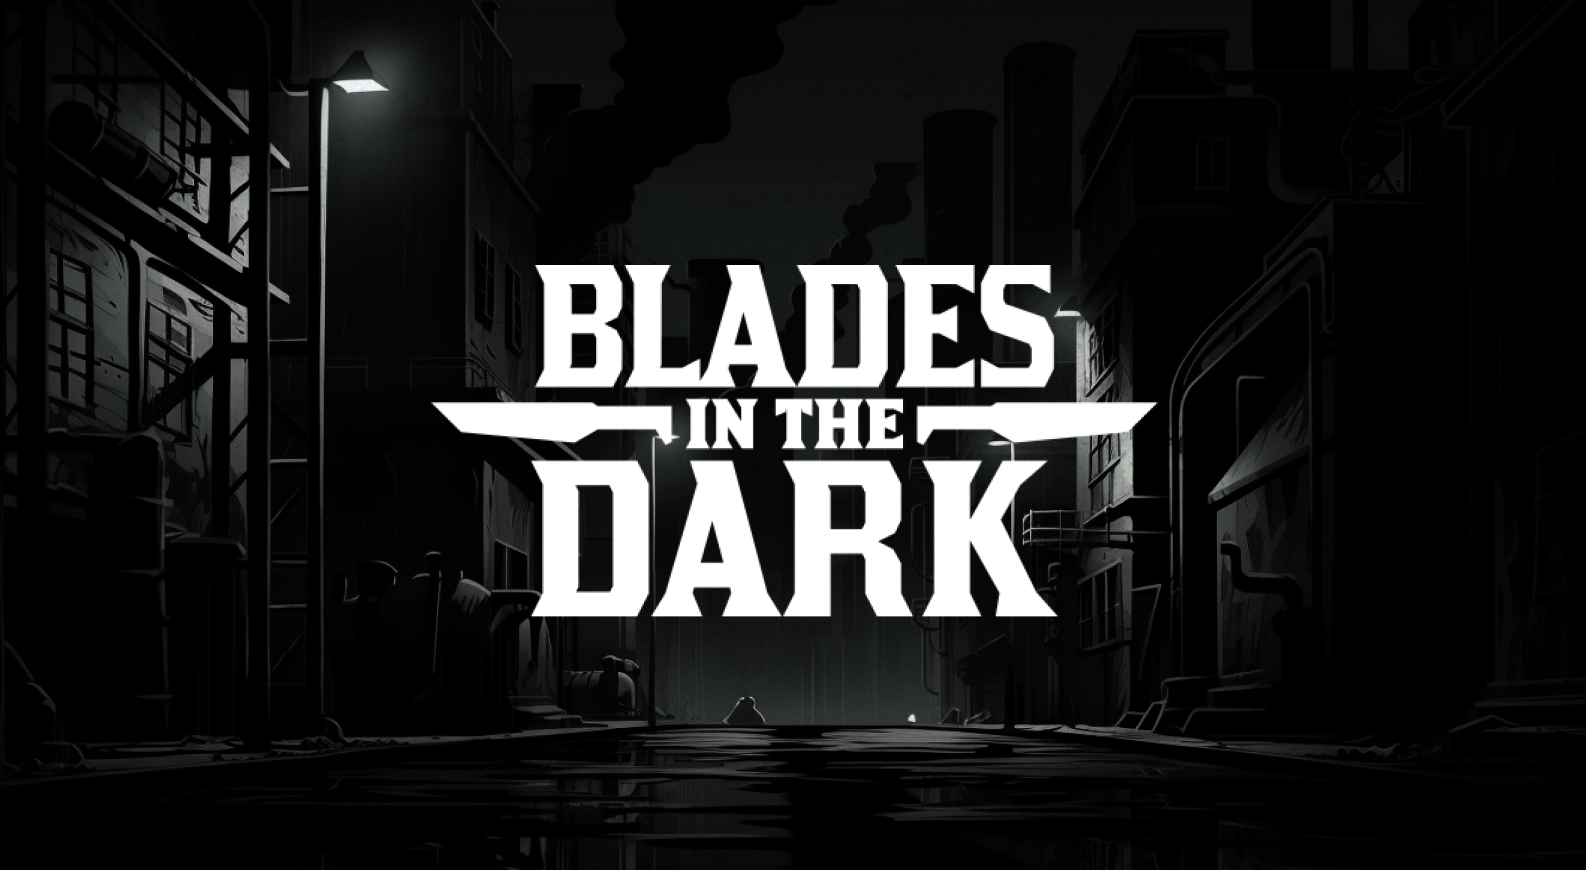 The Blades in the Dark roleplaying game